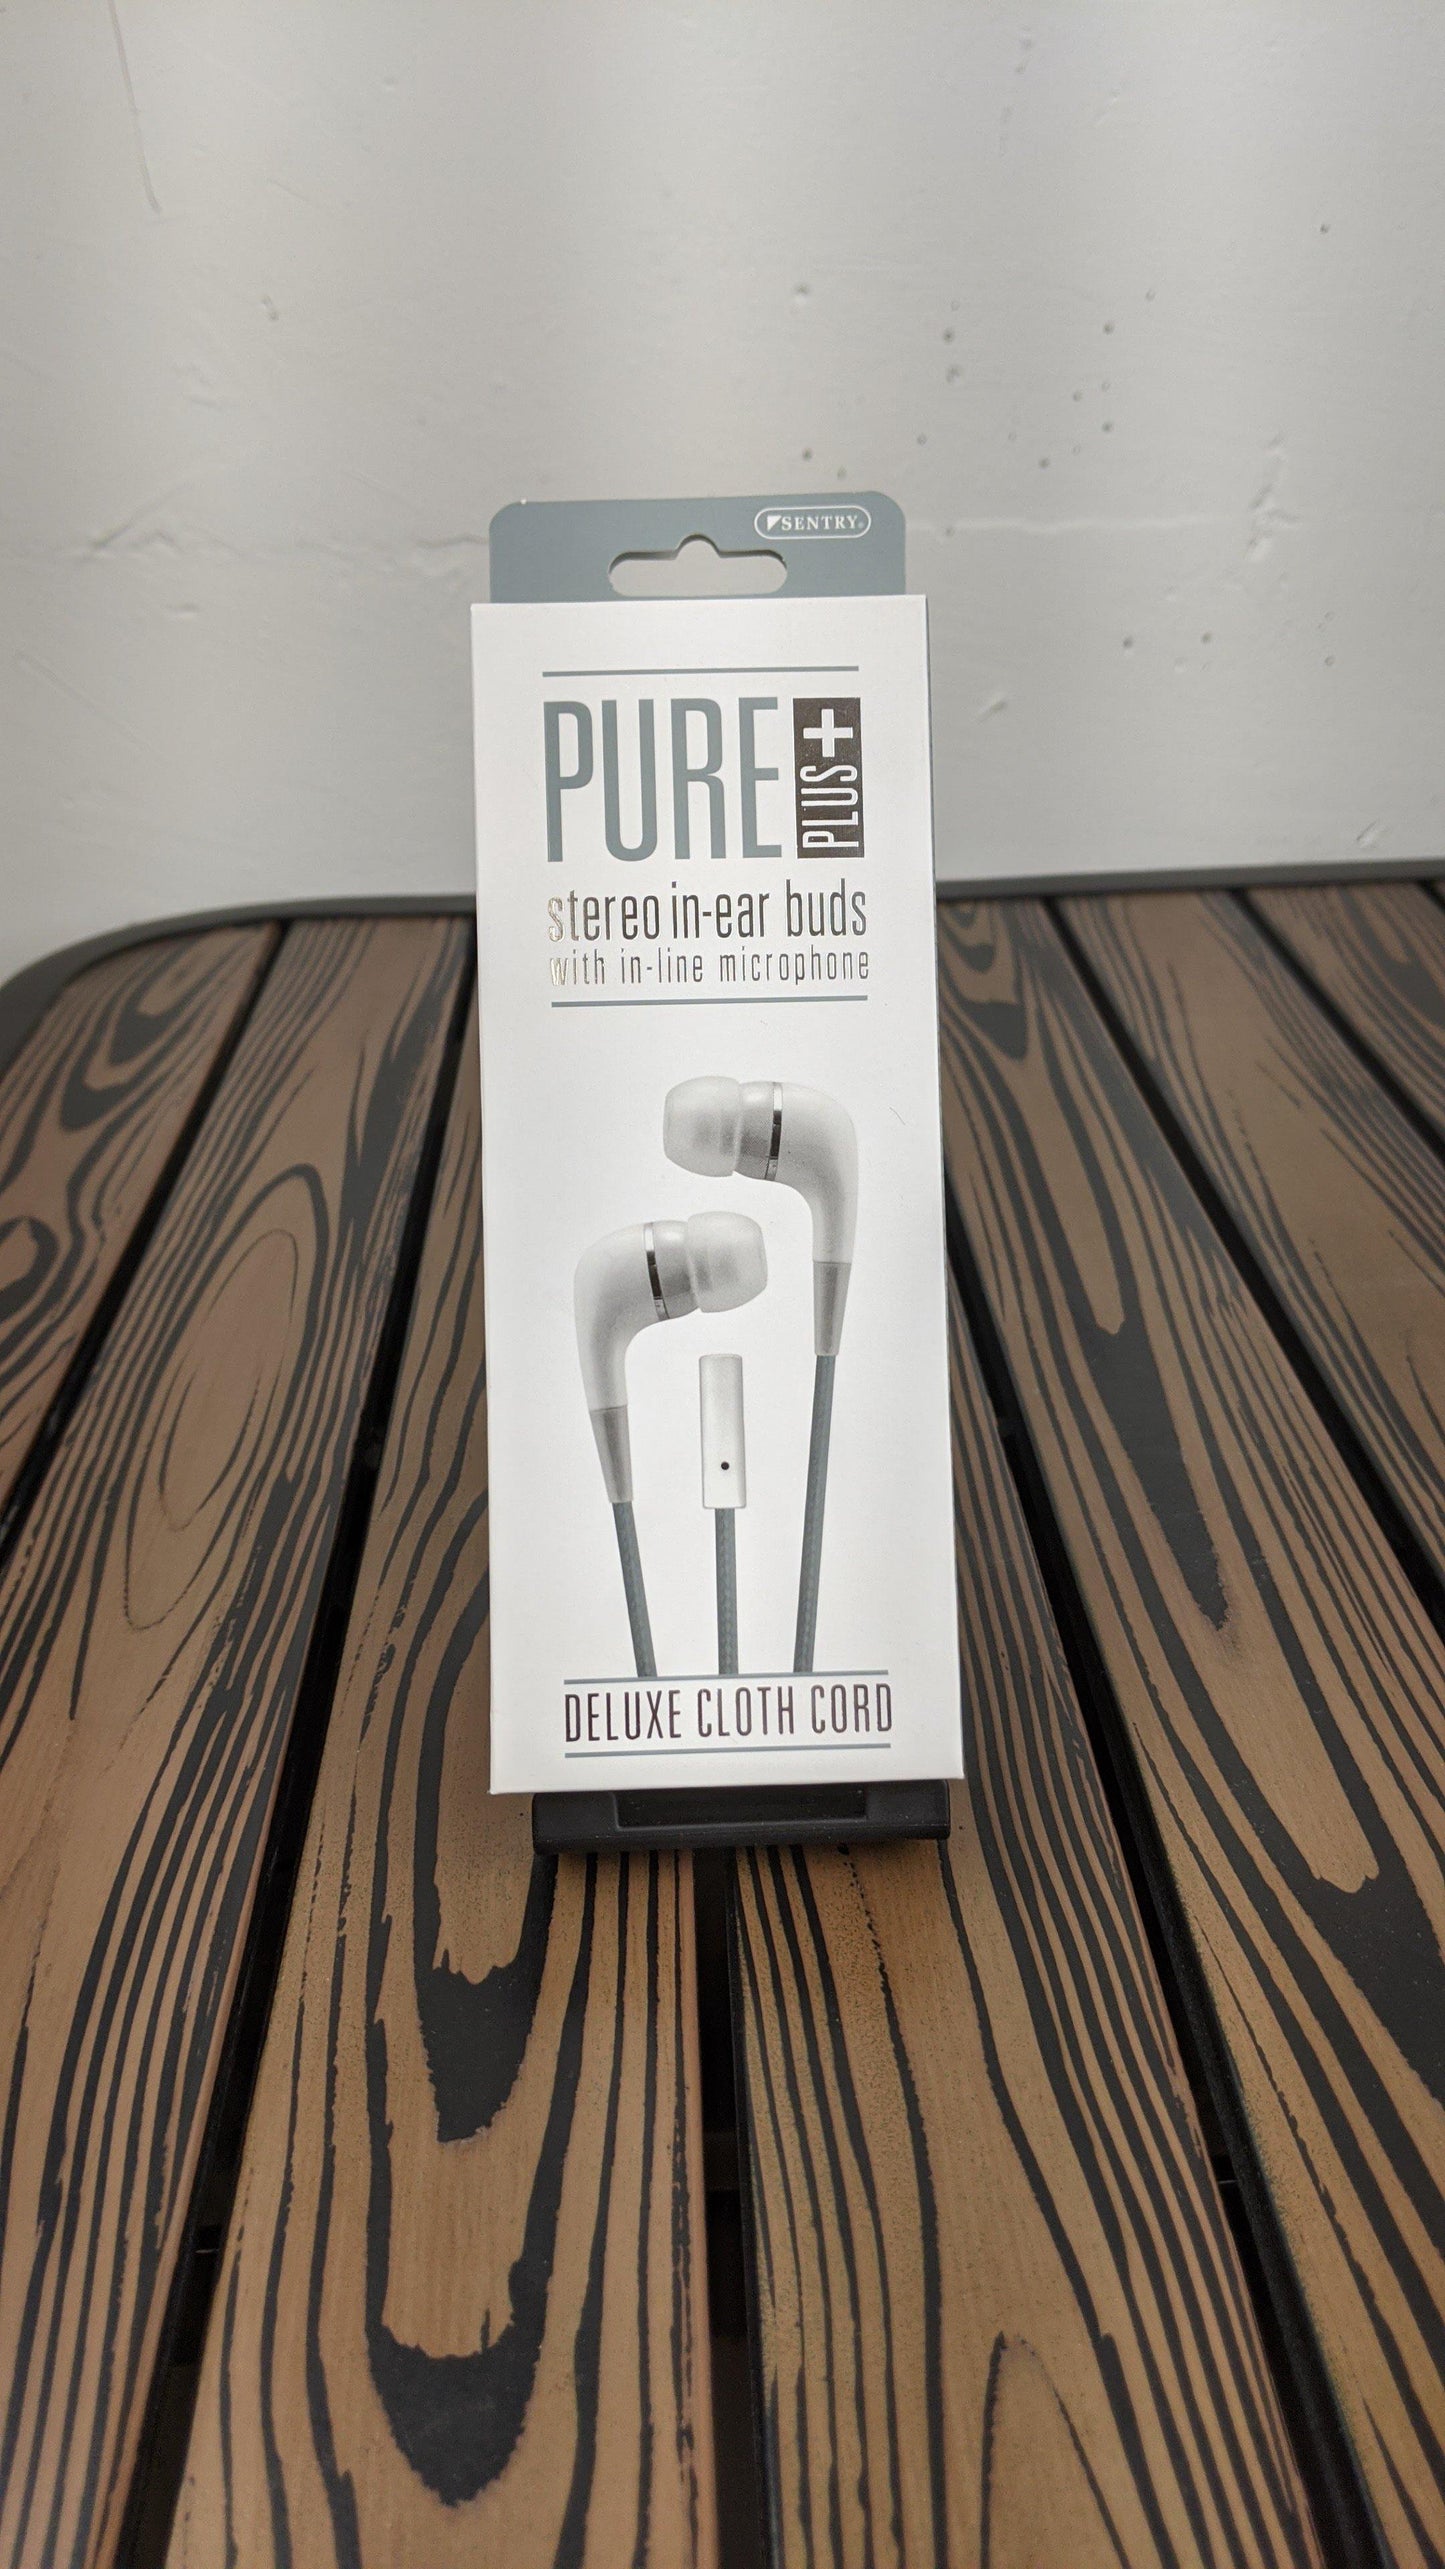 Pure plus earbuds - PCMaster Pro 